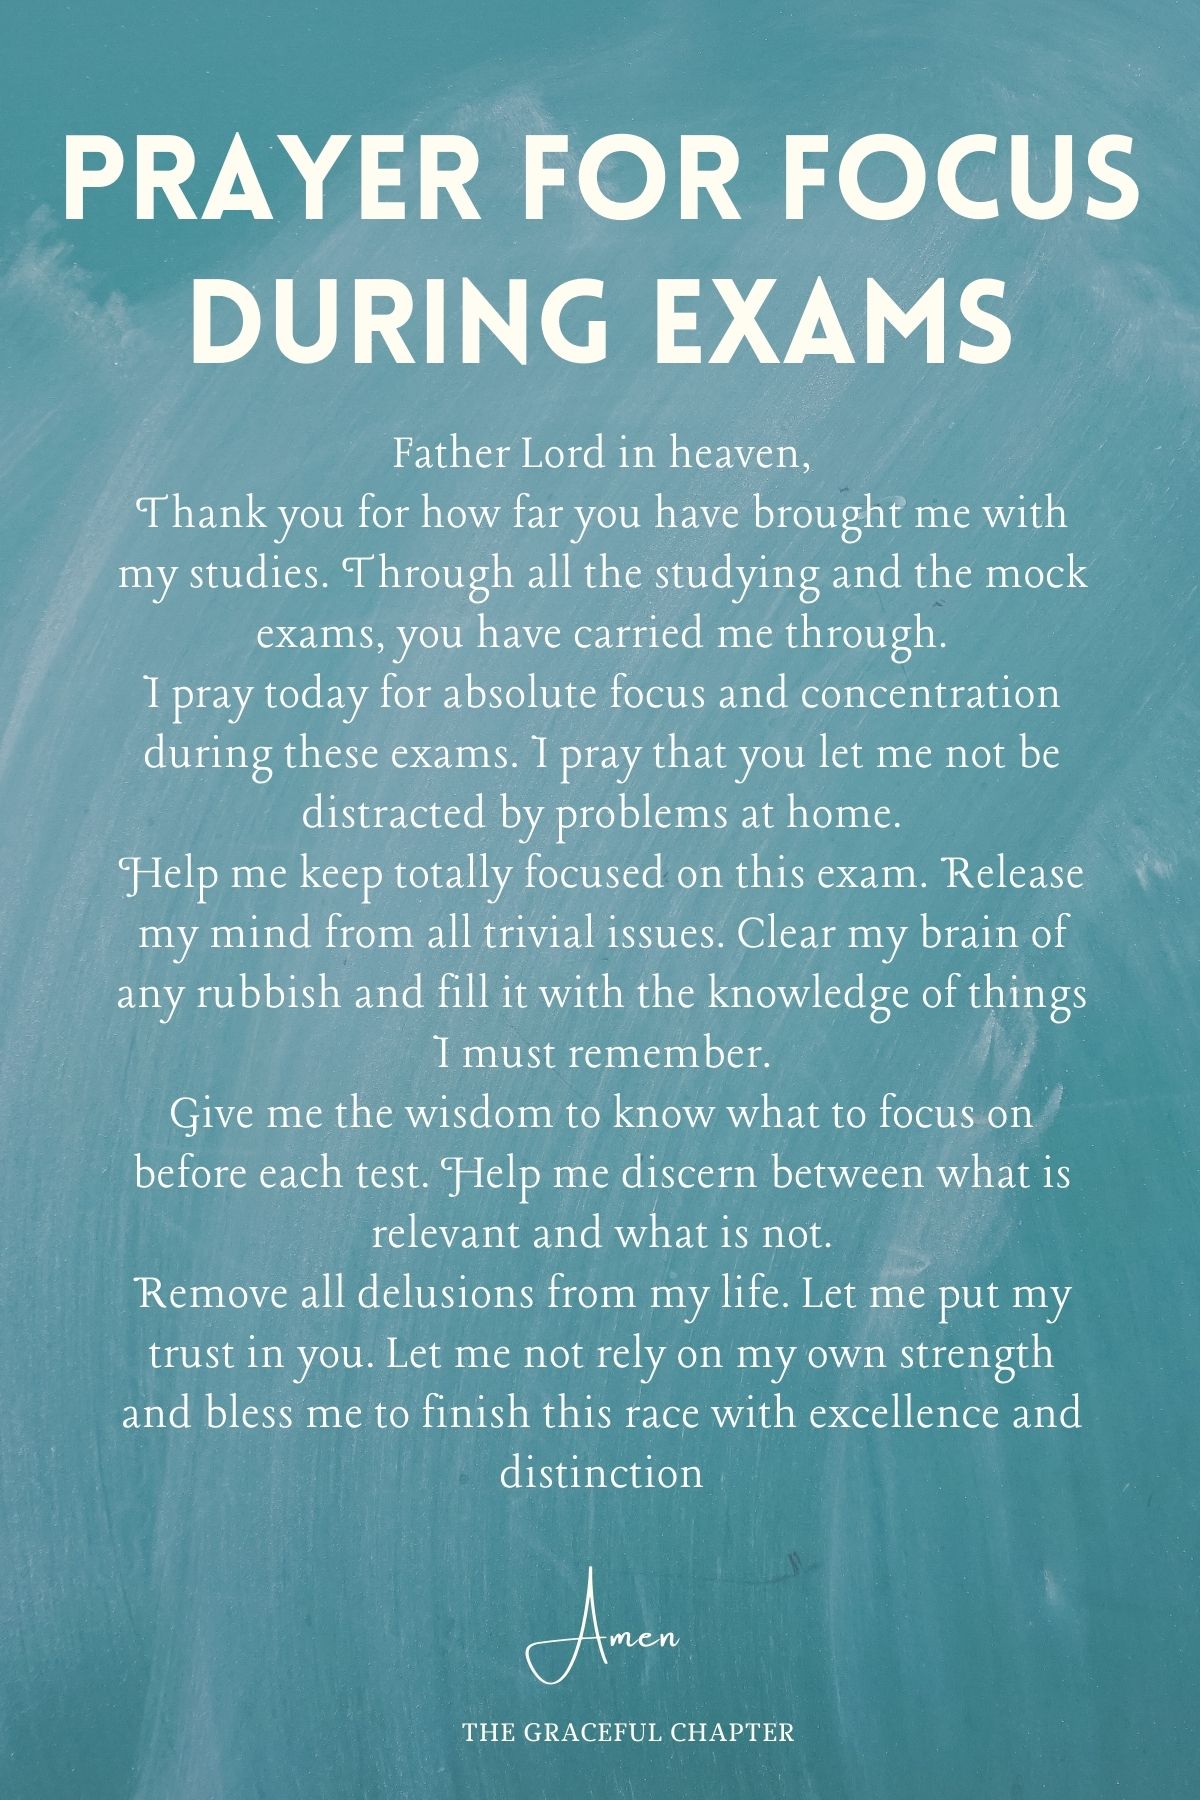 Prayer for Focus during Exams